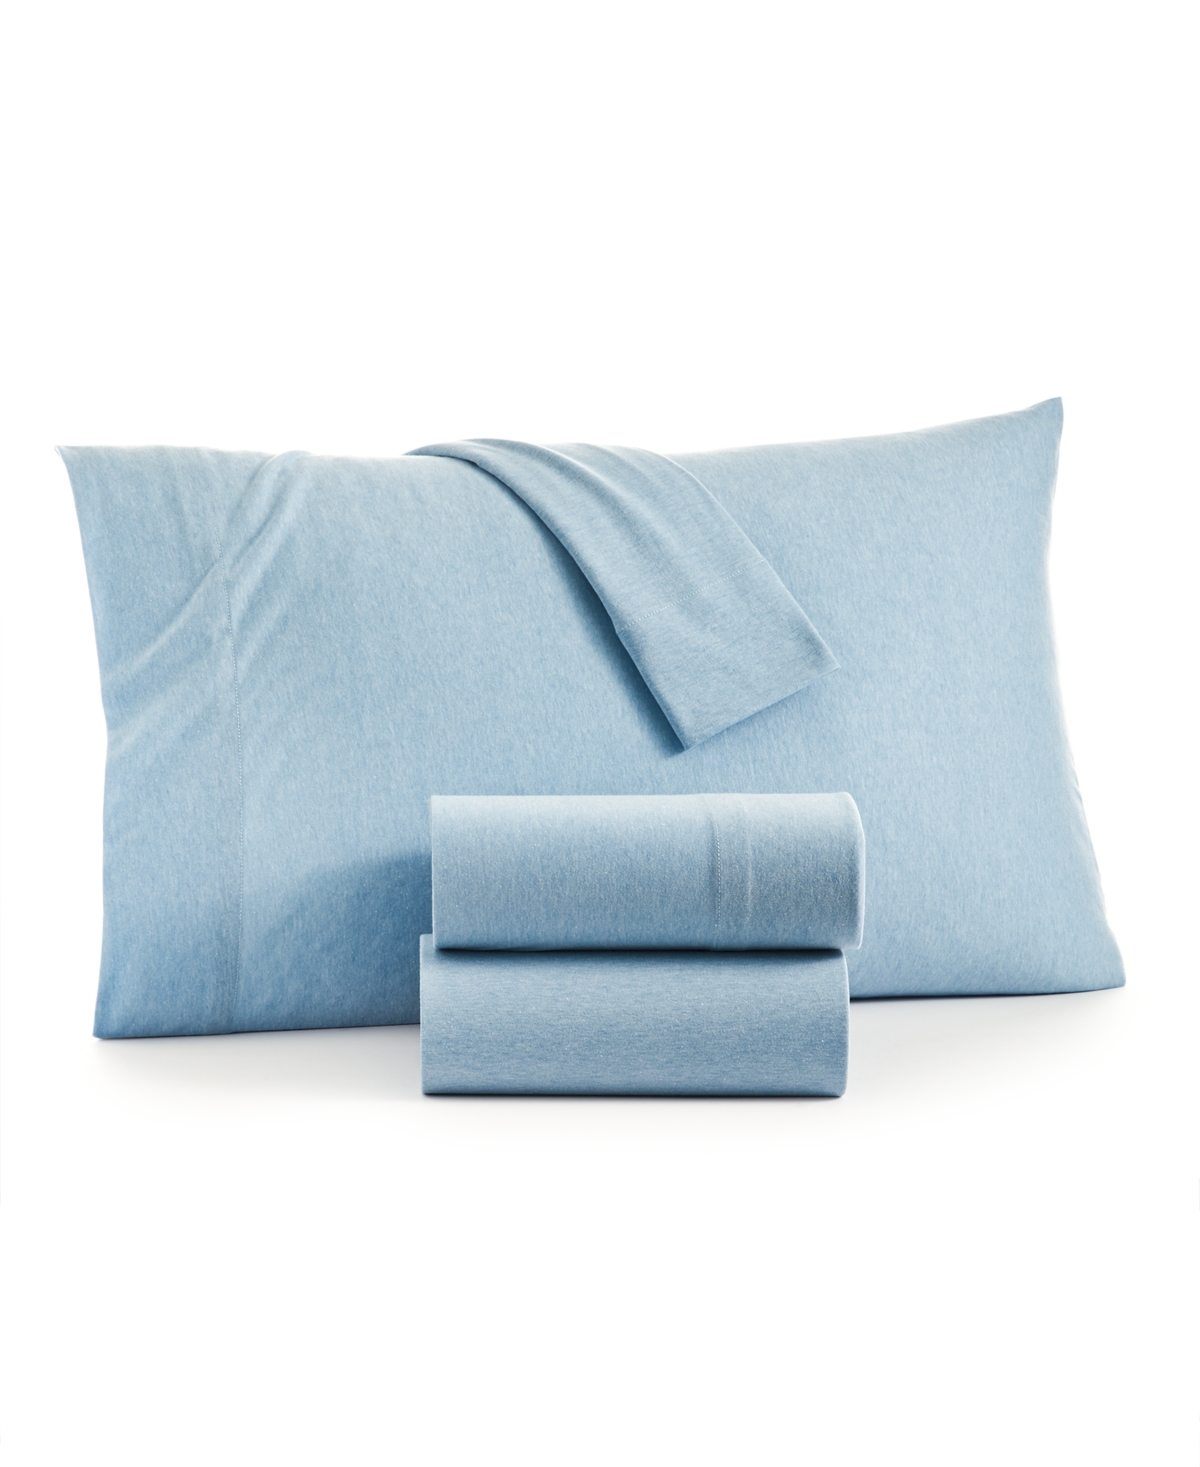 Home Design Jersey 3-pc. Sheet Set, Twin, Created For Macy's In Horizon Blue